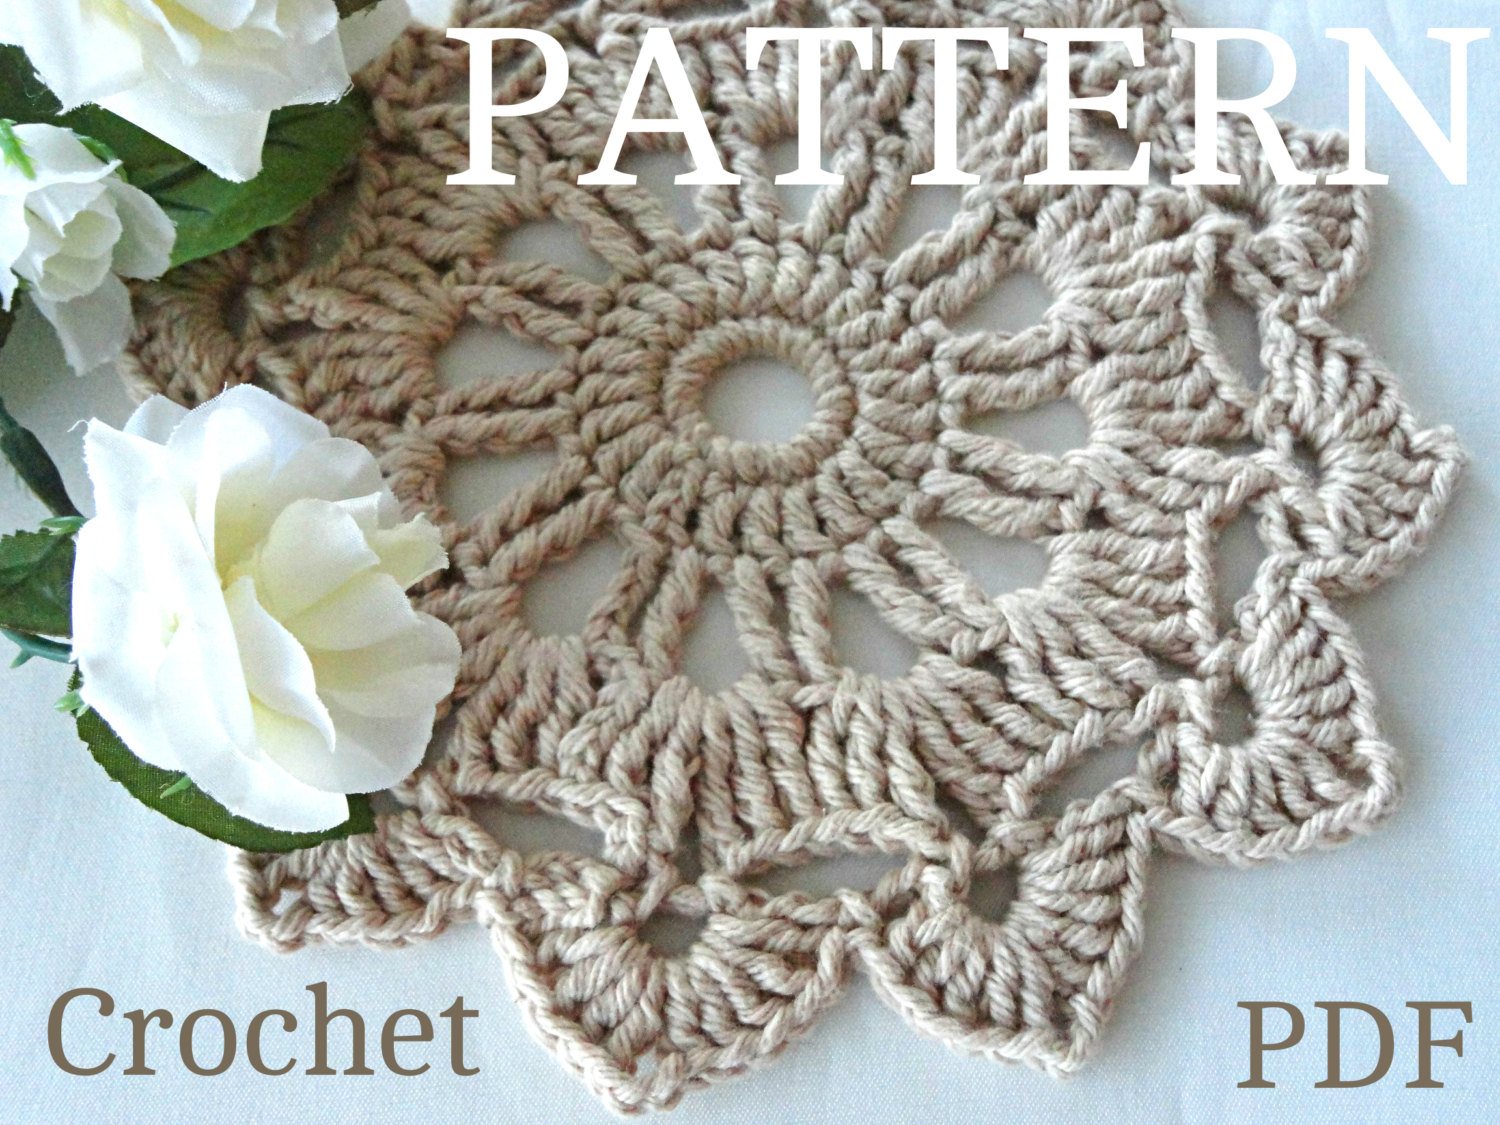 Crochet Placemat Pattern Crochet Pattern Crochet Placemat Coaster Pattern Home Decor Etsy